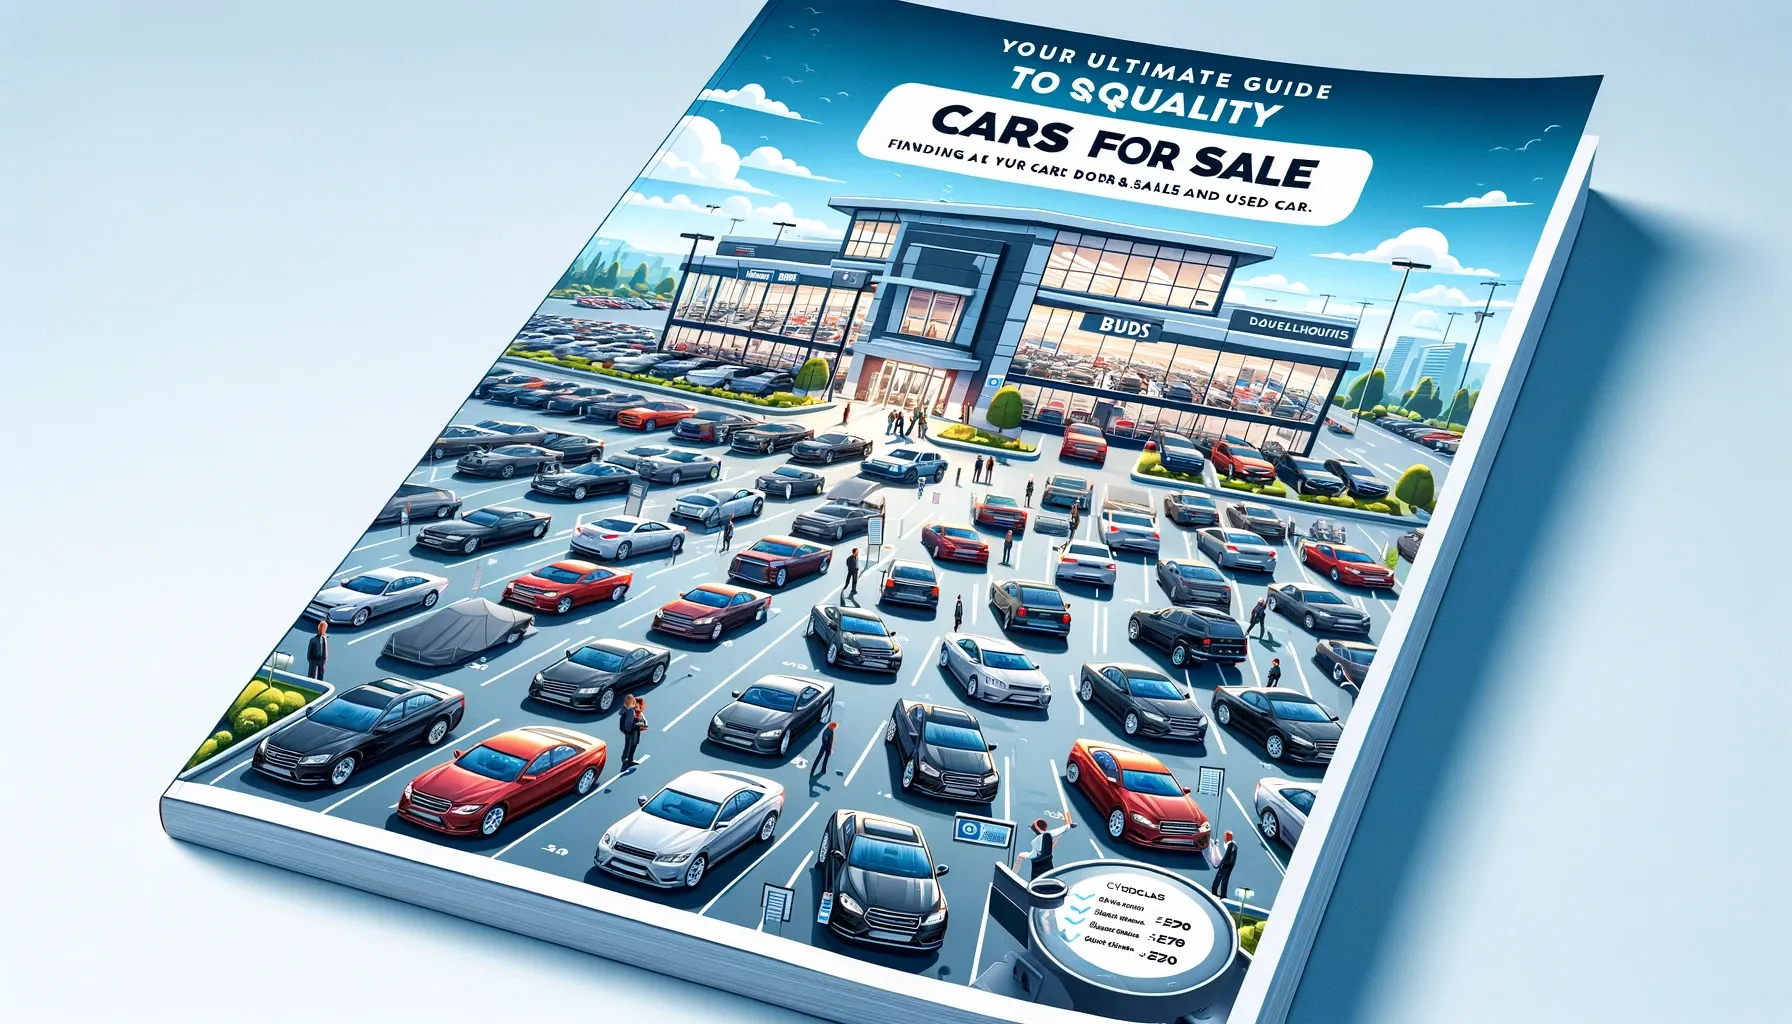 Your Ultimate Guide to Finding Quality Cars for Sale and Used Cars